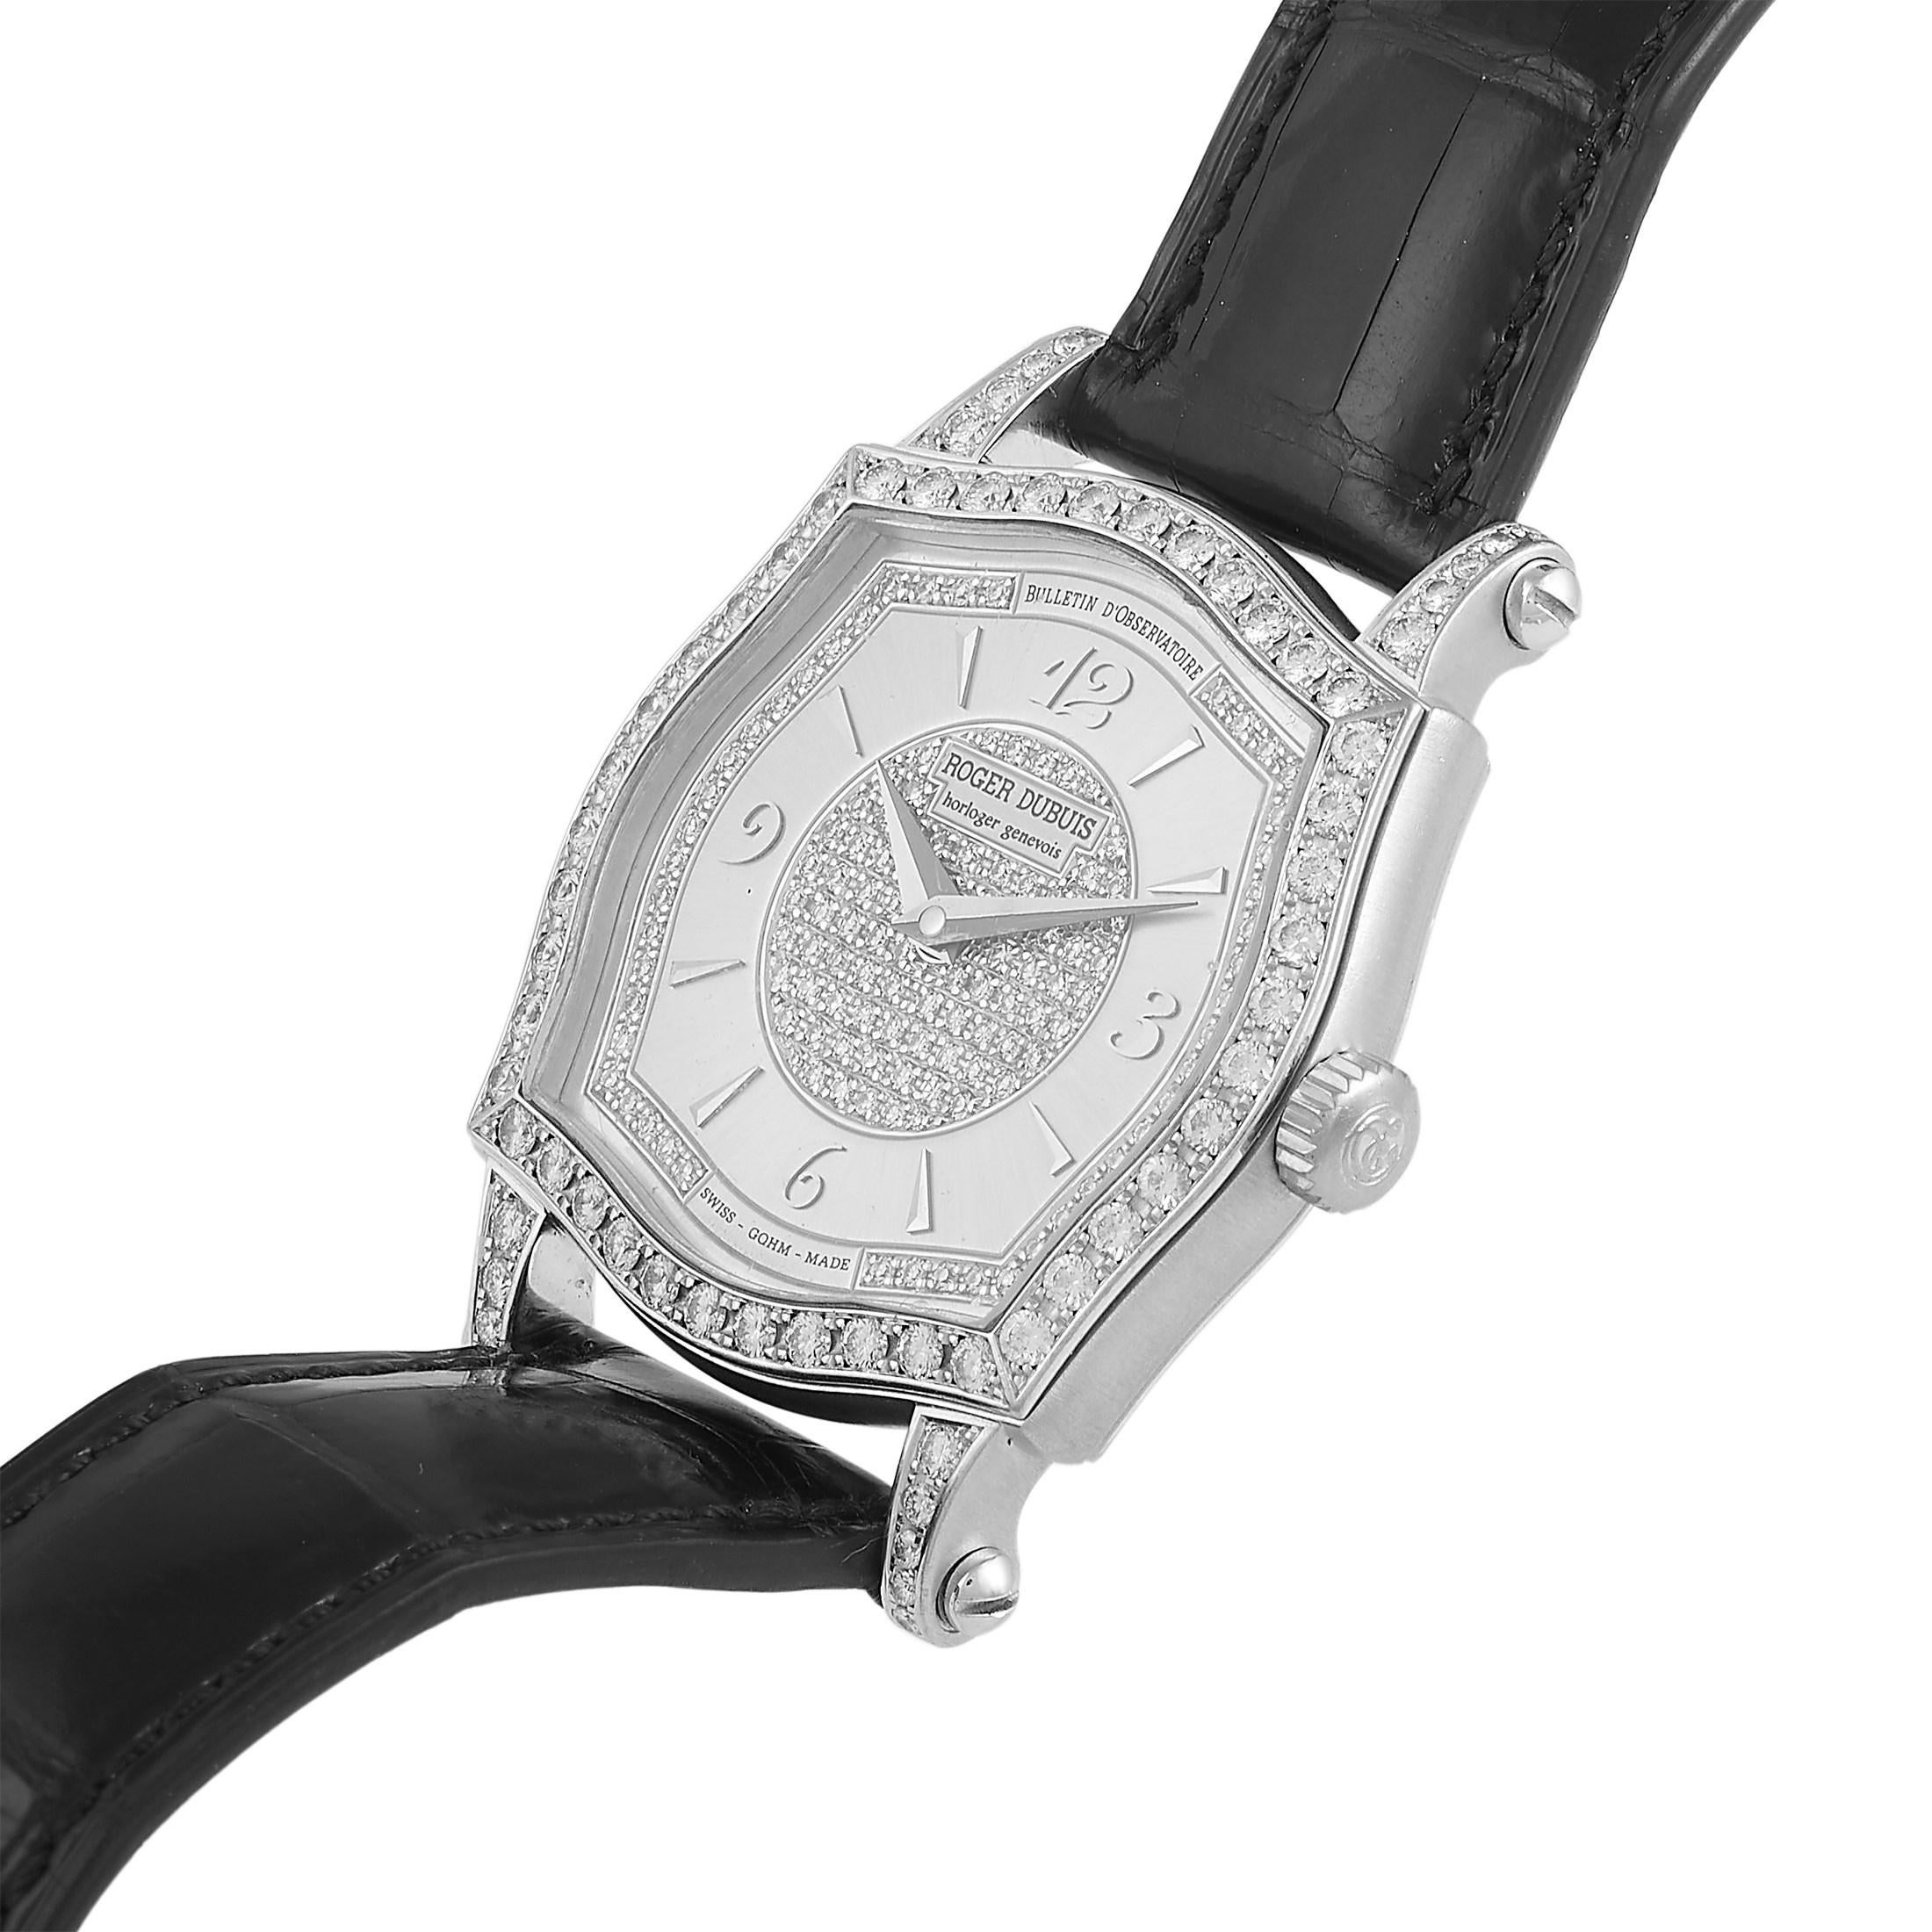 This Roger Dubuis Sympathie 18K White Gold Diamond Ladies Watch S37 575 is designed with the perfect balance of functionality and glamour. It features a solid three-body case with a one-of-a-kind square-cambered shape. Its four-section bezel is